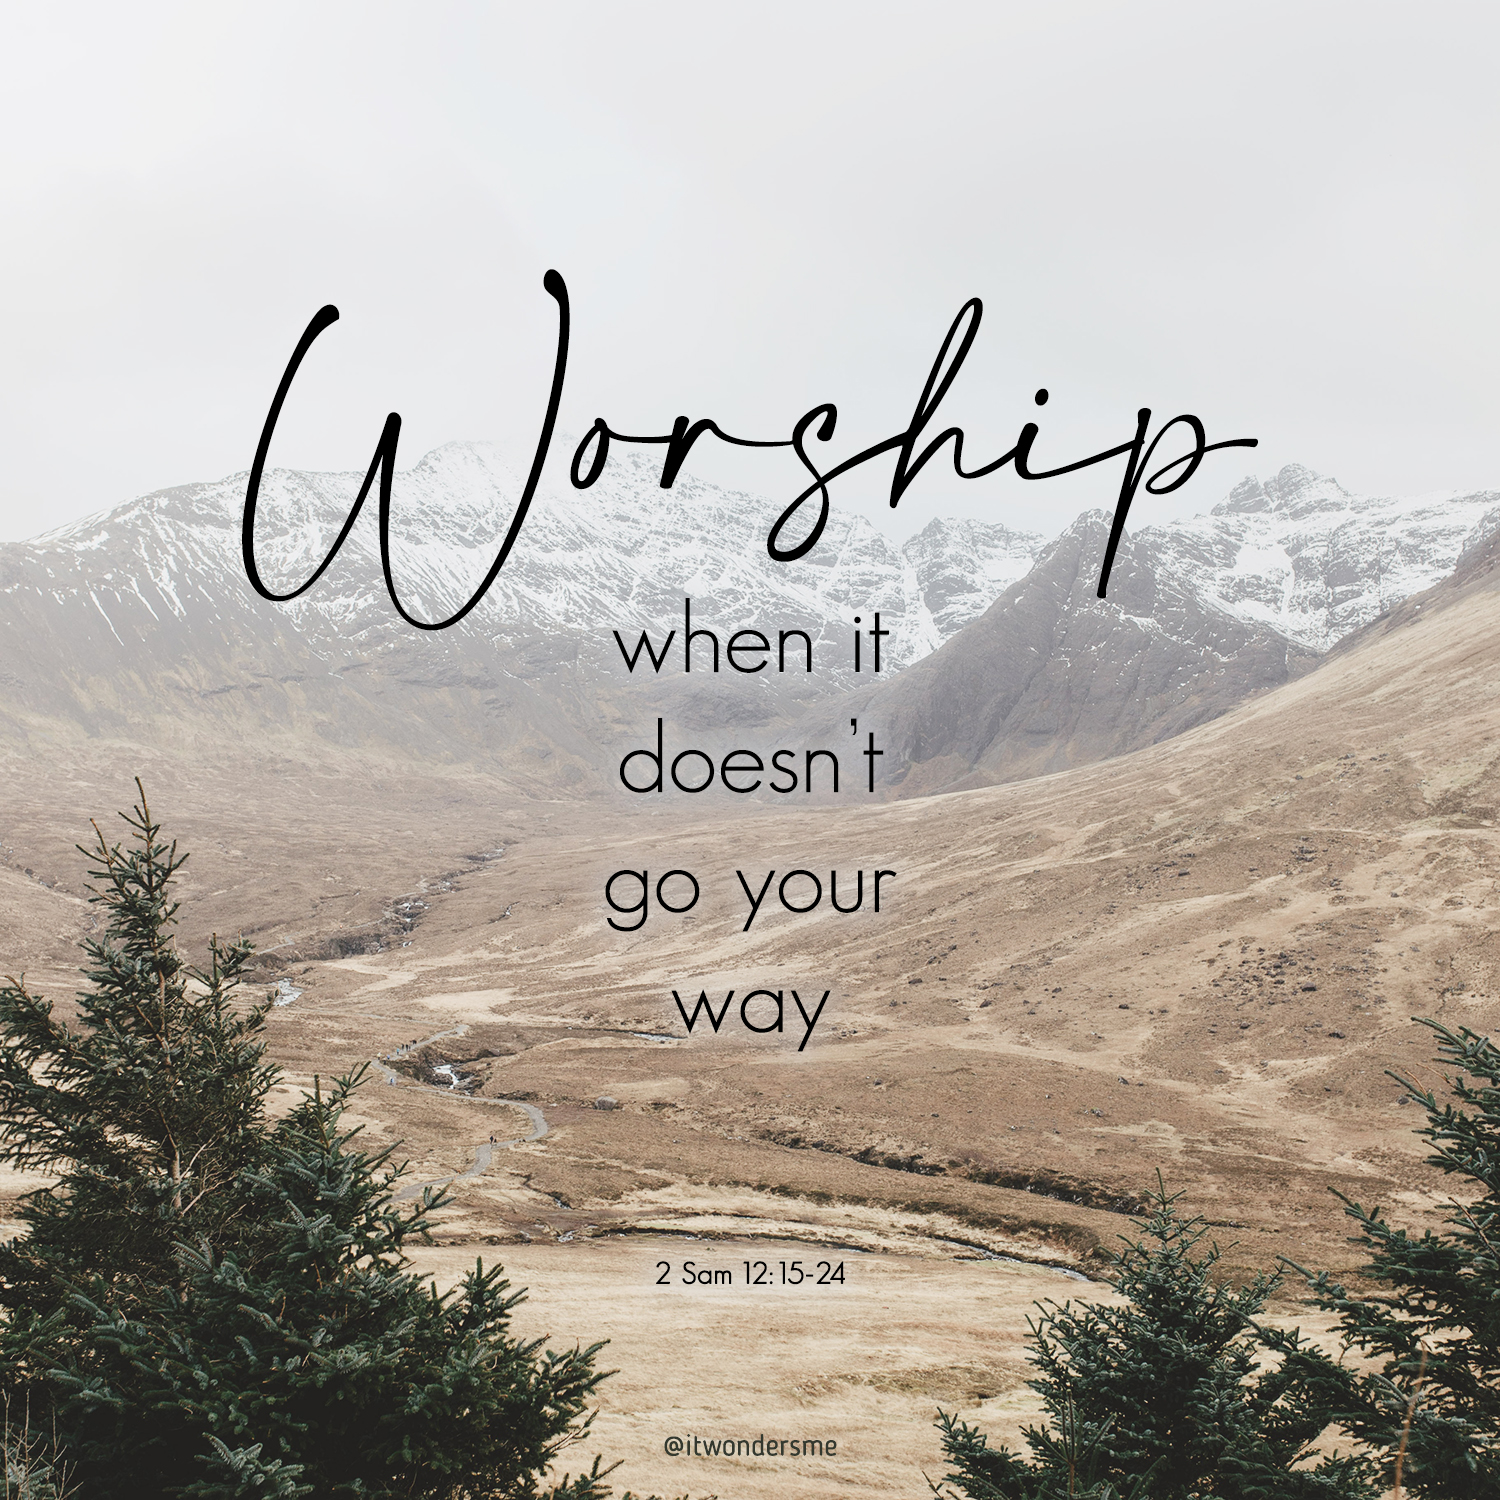 Worship when it doesn't go your way